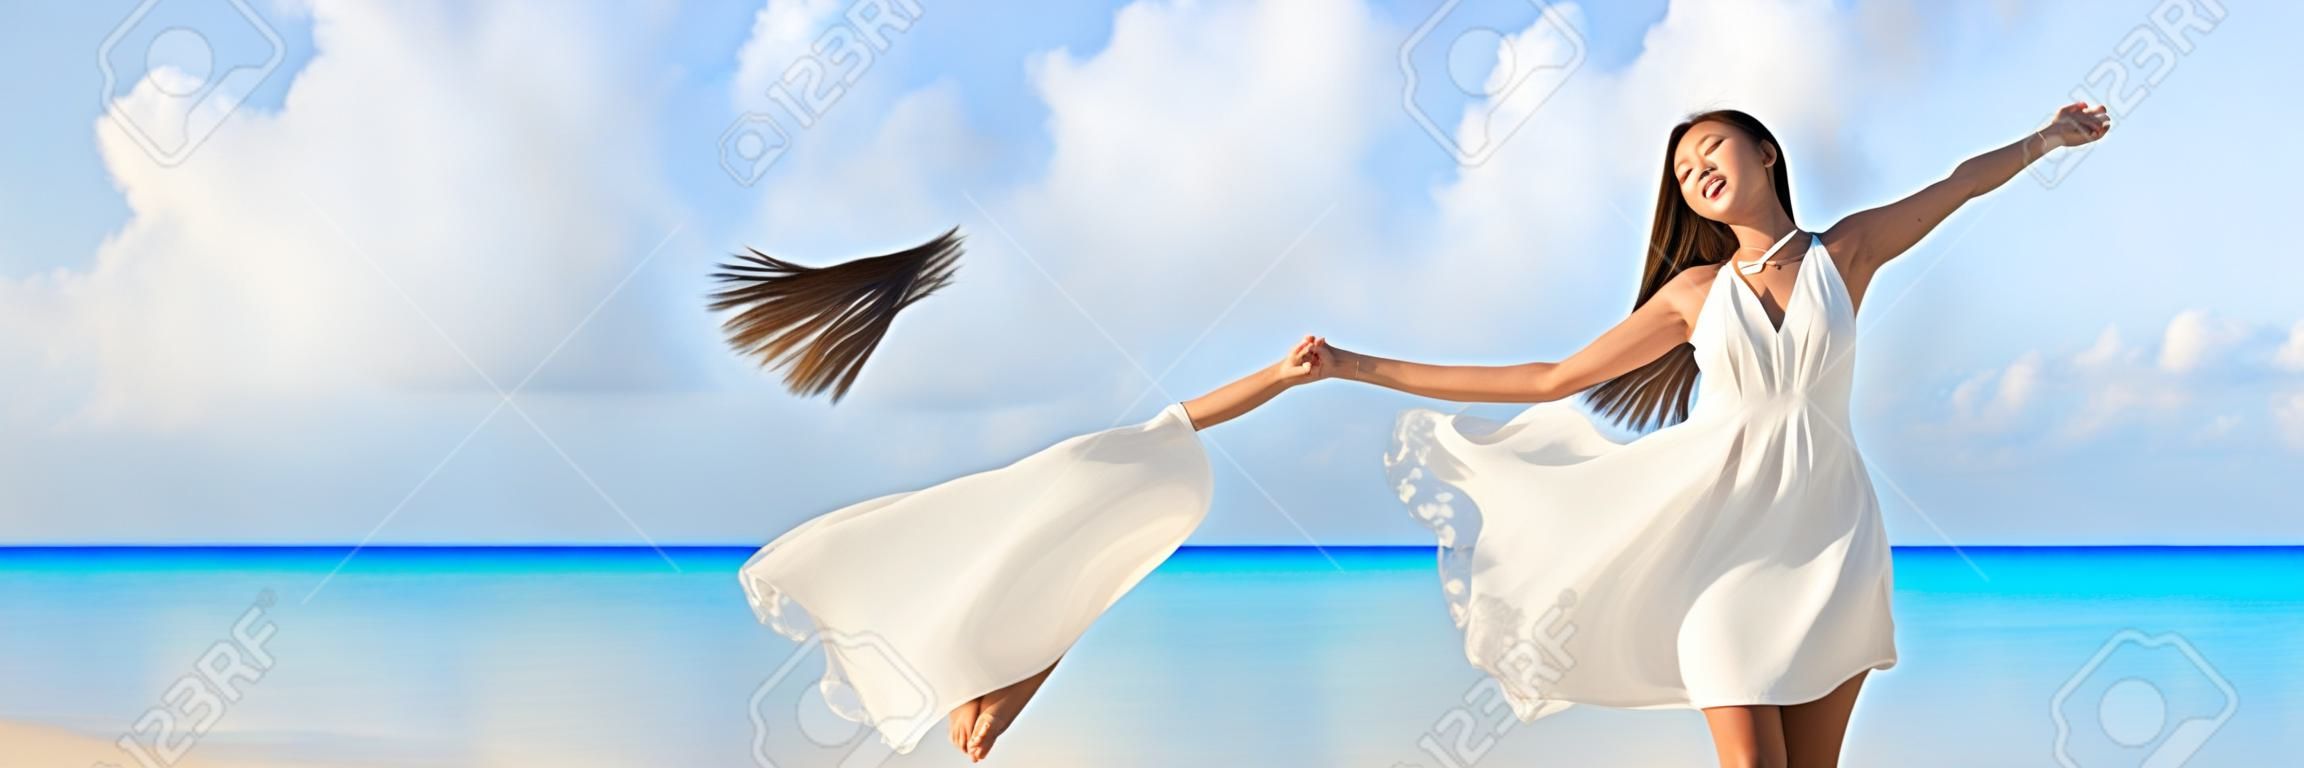 Freedom young woman with arms up outstretched to the sky with blue ocean landscape beach background copy space. Banner panorama. Asian girl in white dress dancing carefree in sunset.